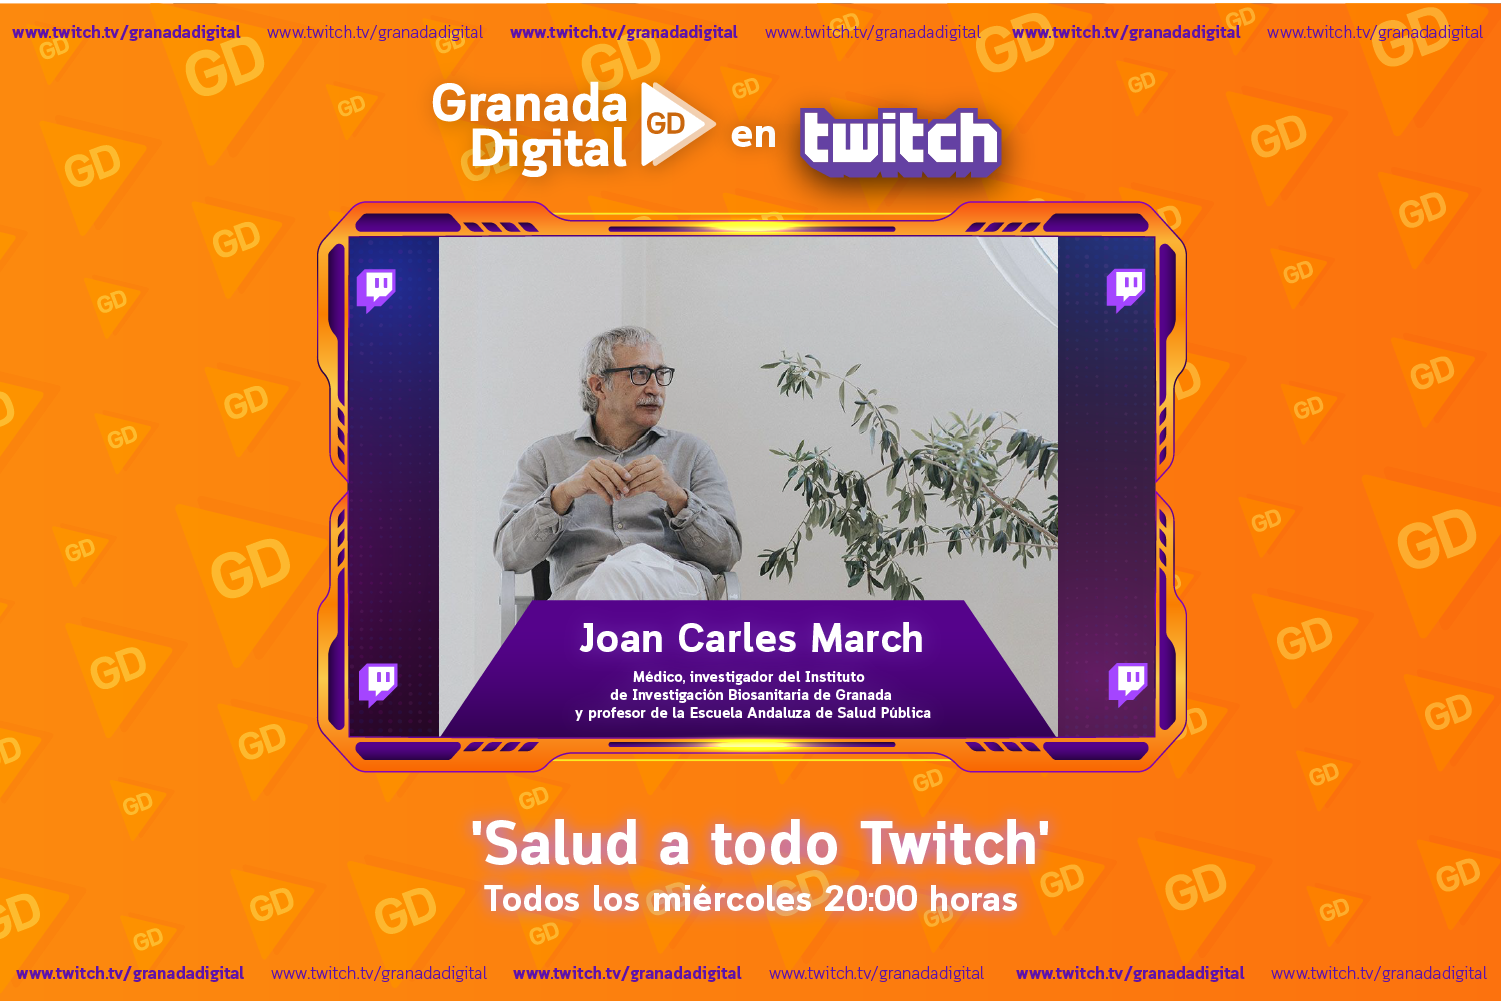 Salud a Todo Twitch focuses on the current and future of Primary Care